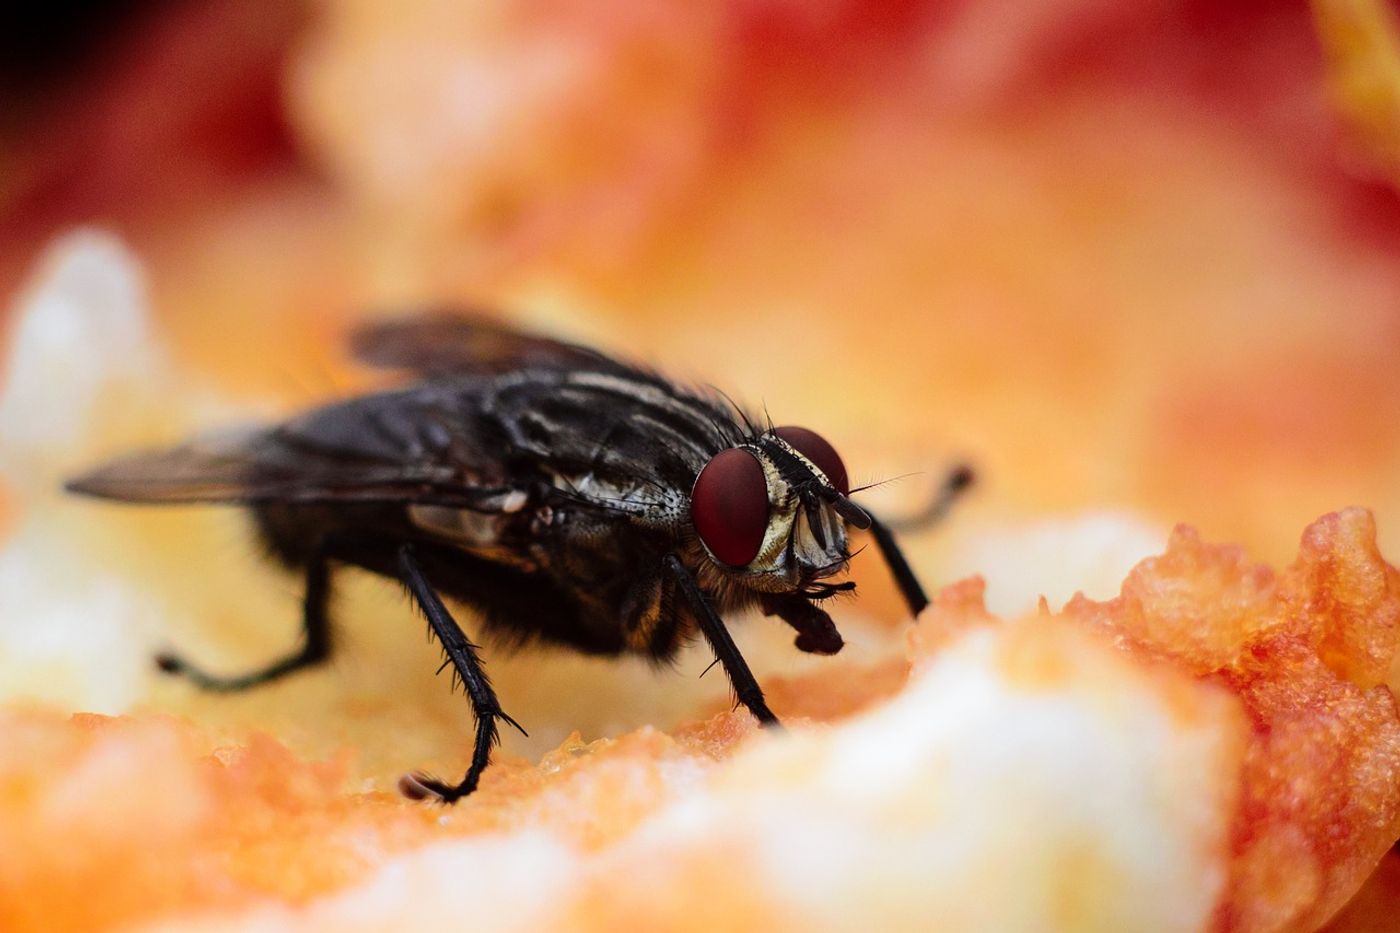 The fruit fly is an example of an insect with compound eyes.